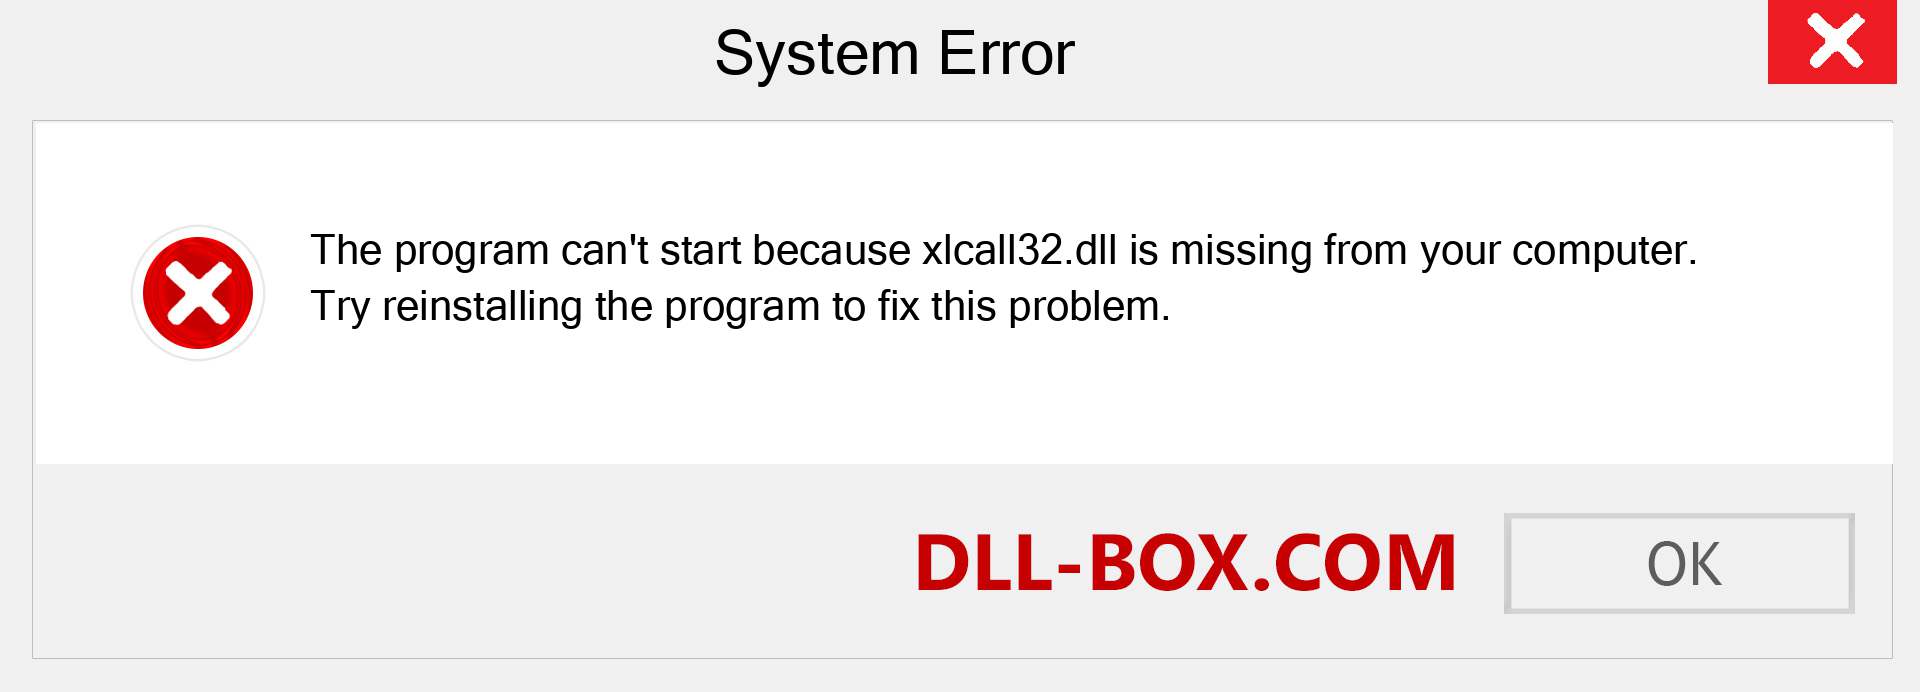  xlcall32.dll file is missing?. Download for Windows 7, 8, 10 - Fix  xlcall32 dll Missing Error on Windows, photos, images